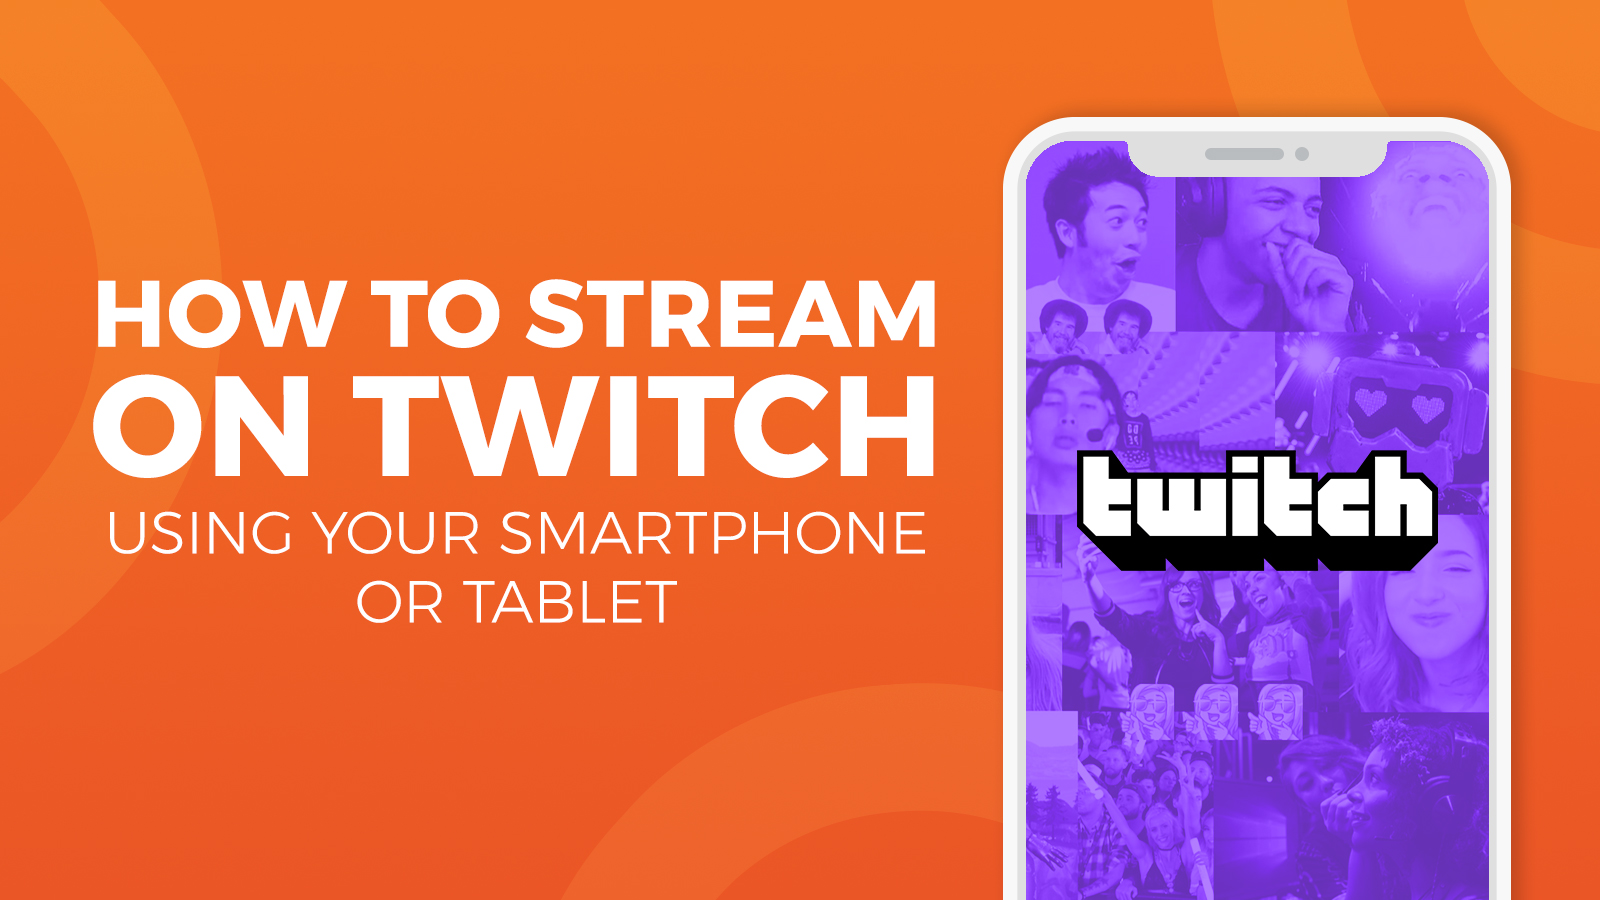 How to livestream on Twitch with an iPhone or iPad